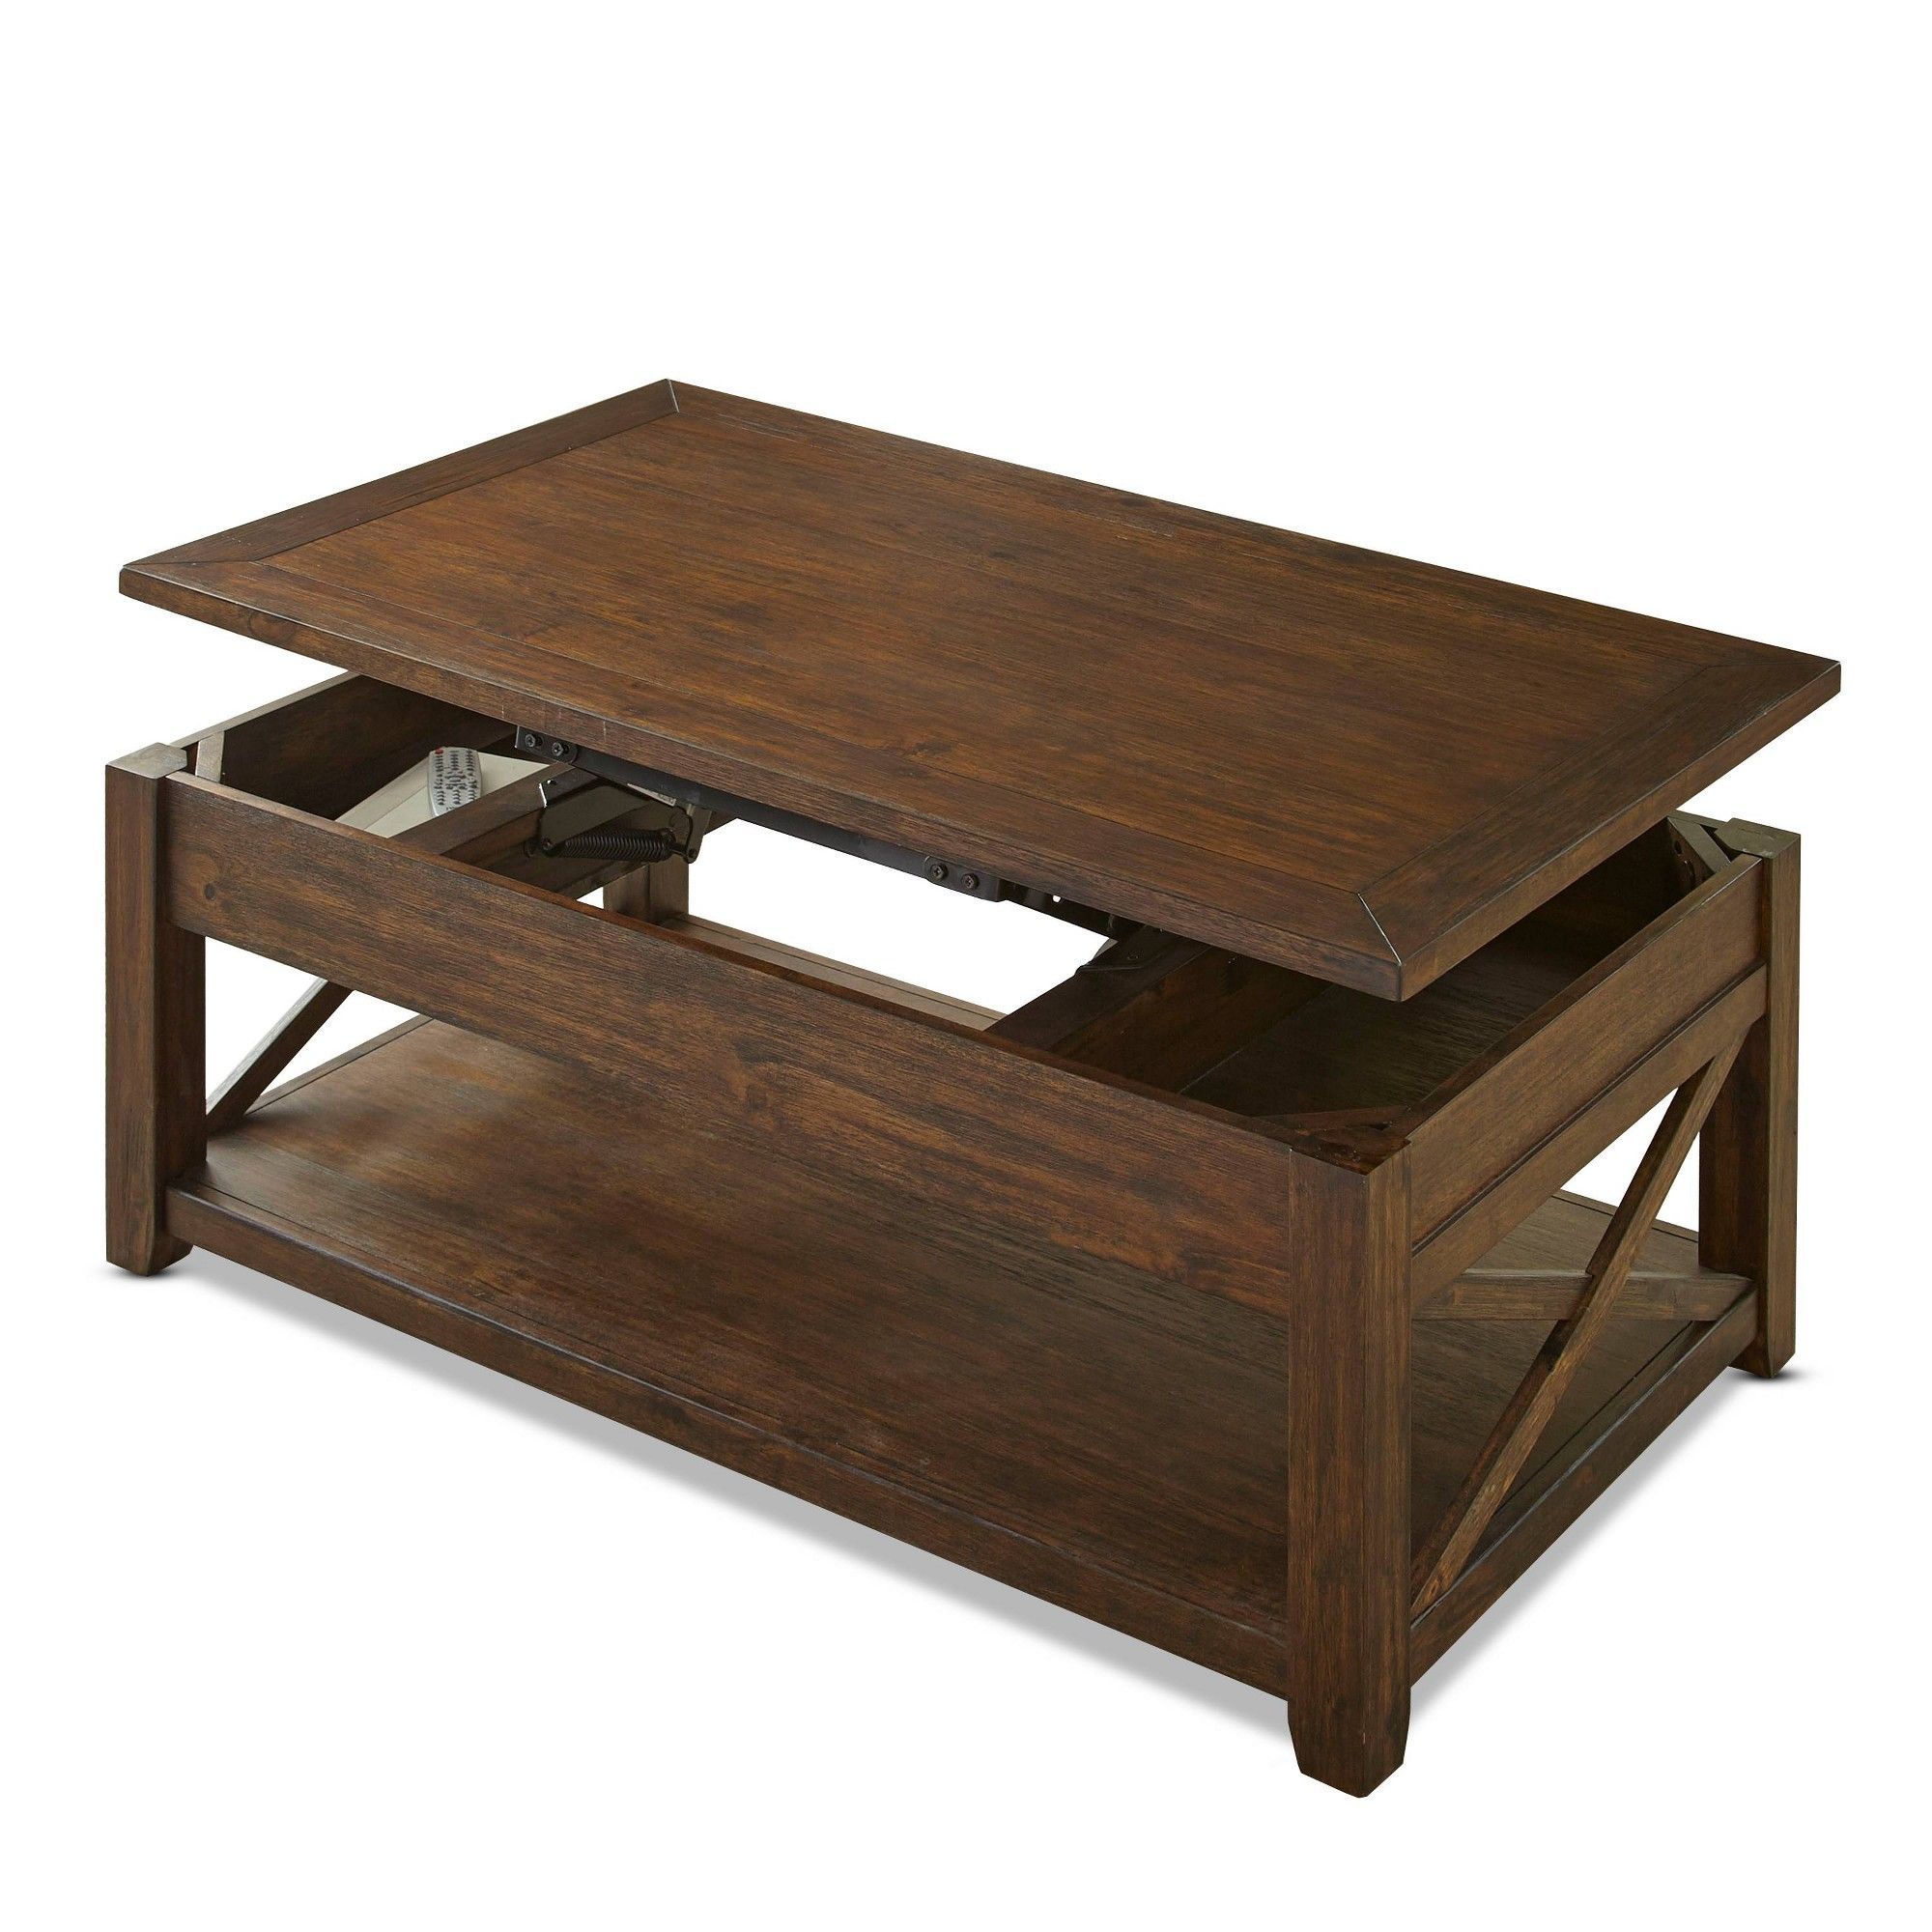 Rustic Lenka Lift Top Cocktail Table Mocha Finish – Steve For Rustic Bronze Patina Coffee Tables (View 11 of 15)